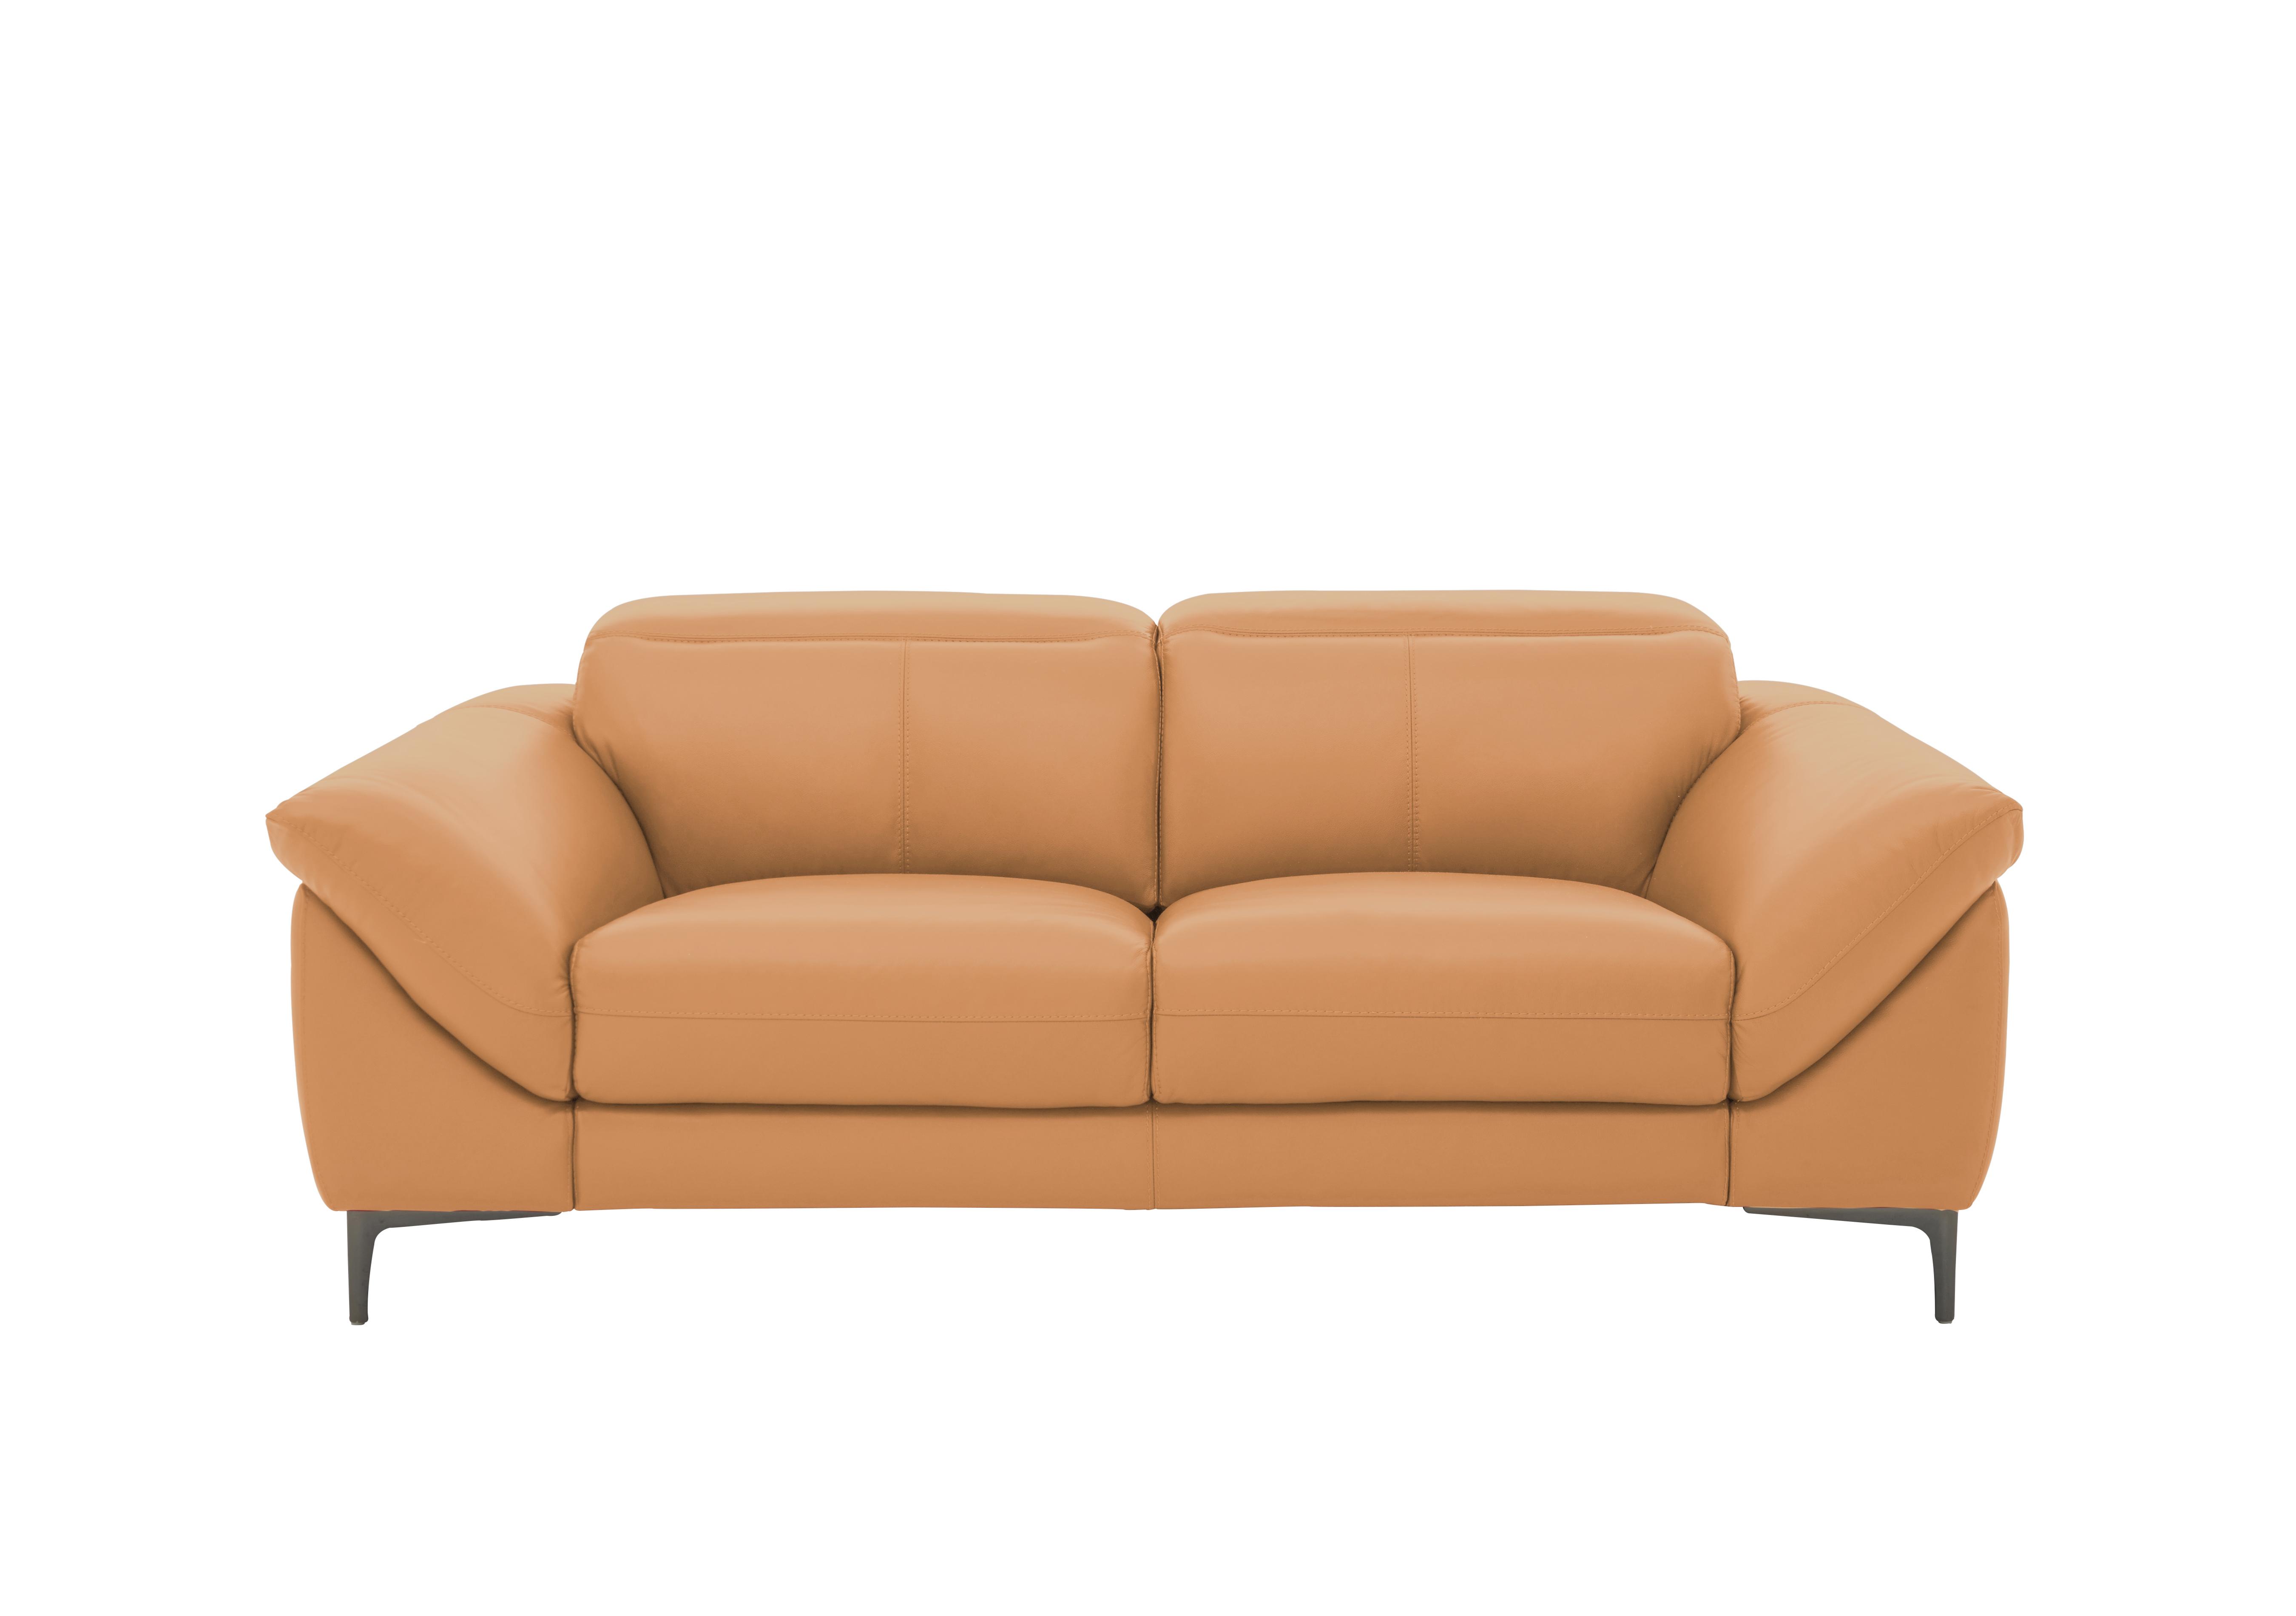 Galaxy 3 Seater Leather Sofa with Manual Headrests - World of Leather ...